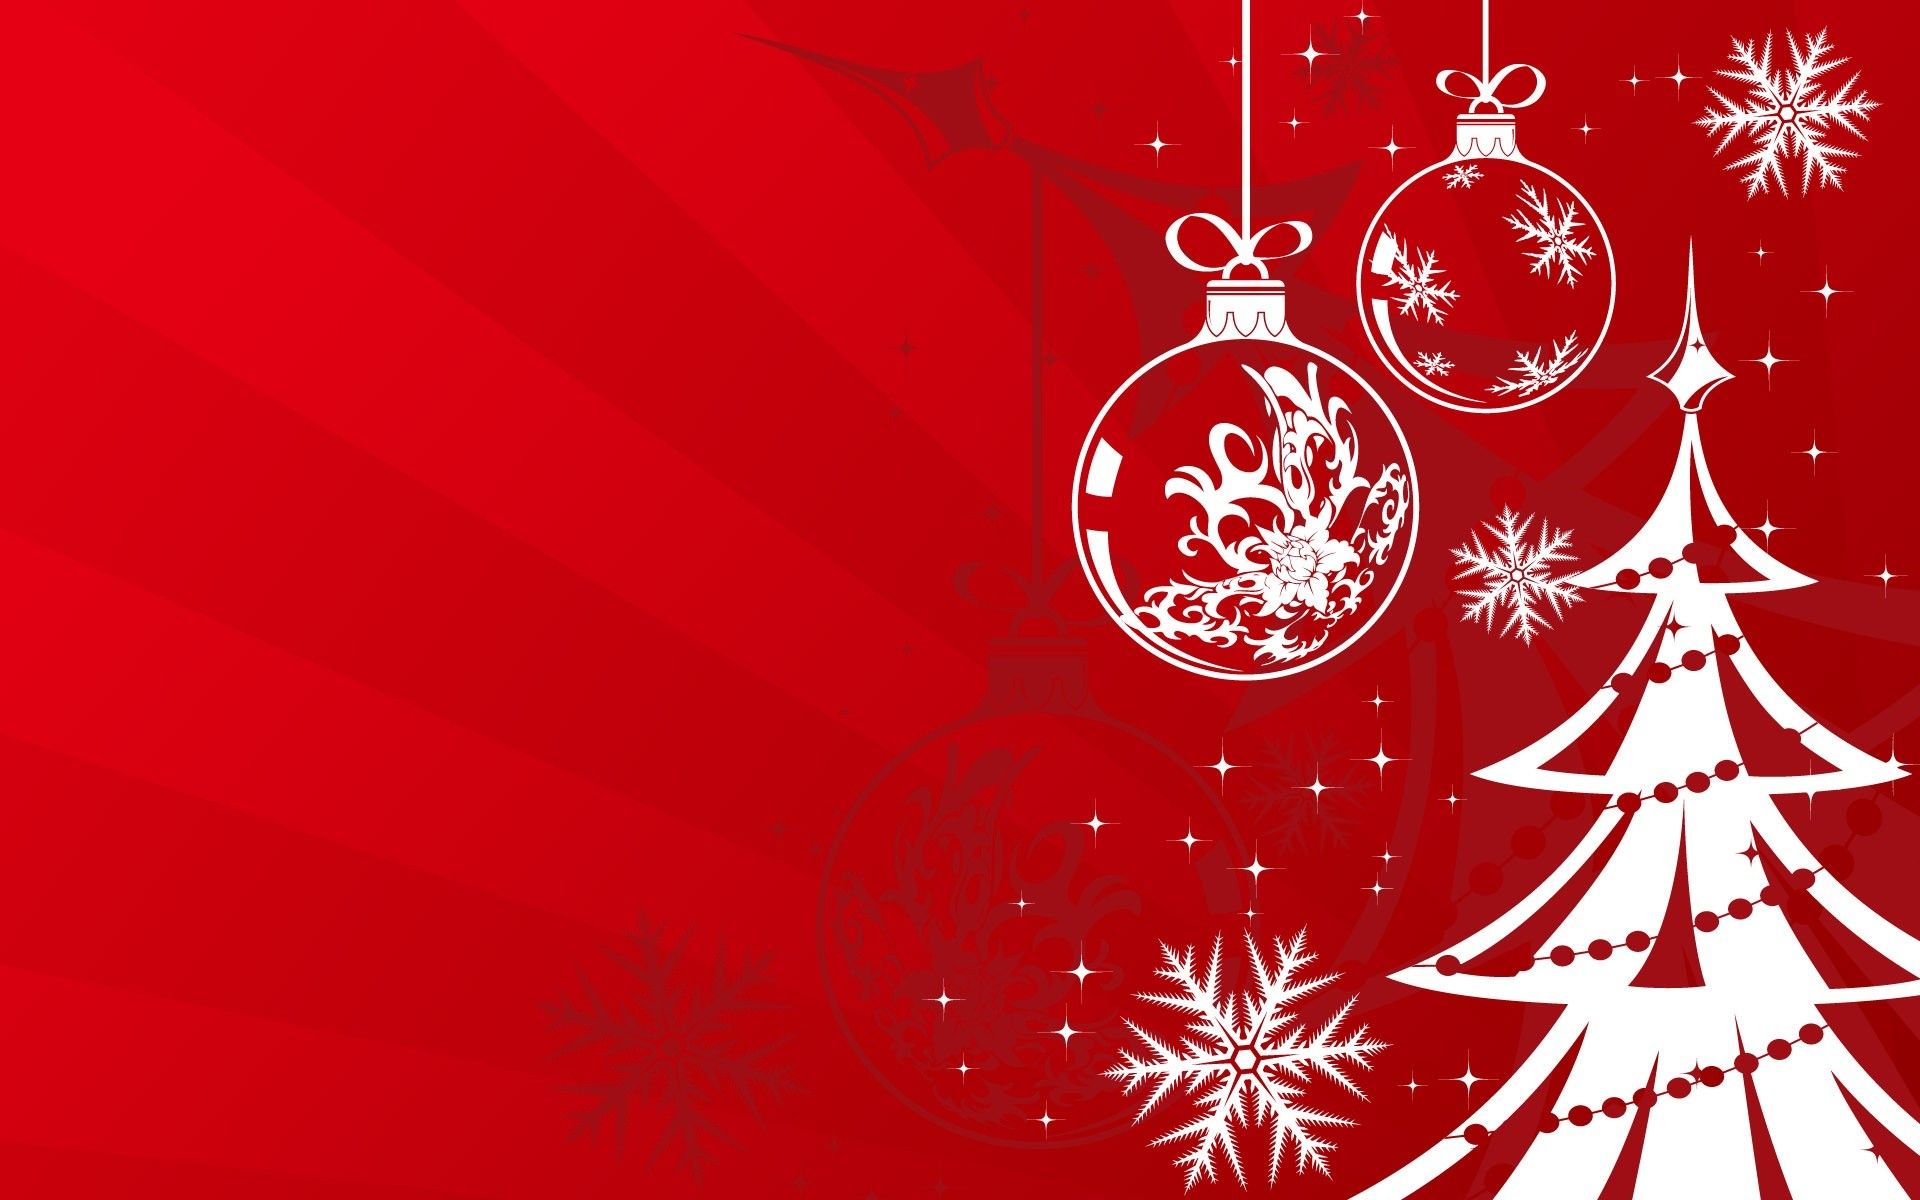 2015 Christmas Backgrounds - Wallpapers, Pics, Pictures, Images